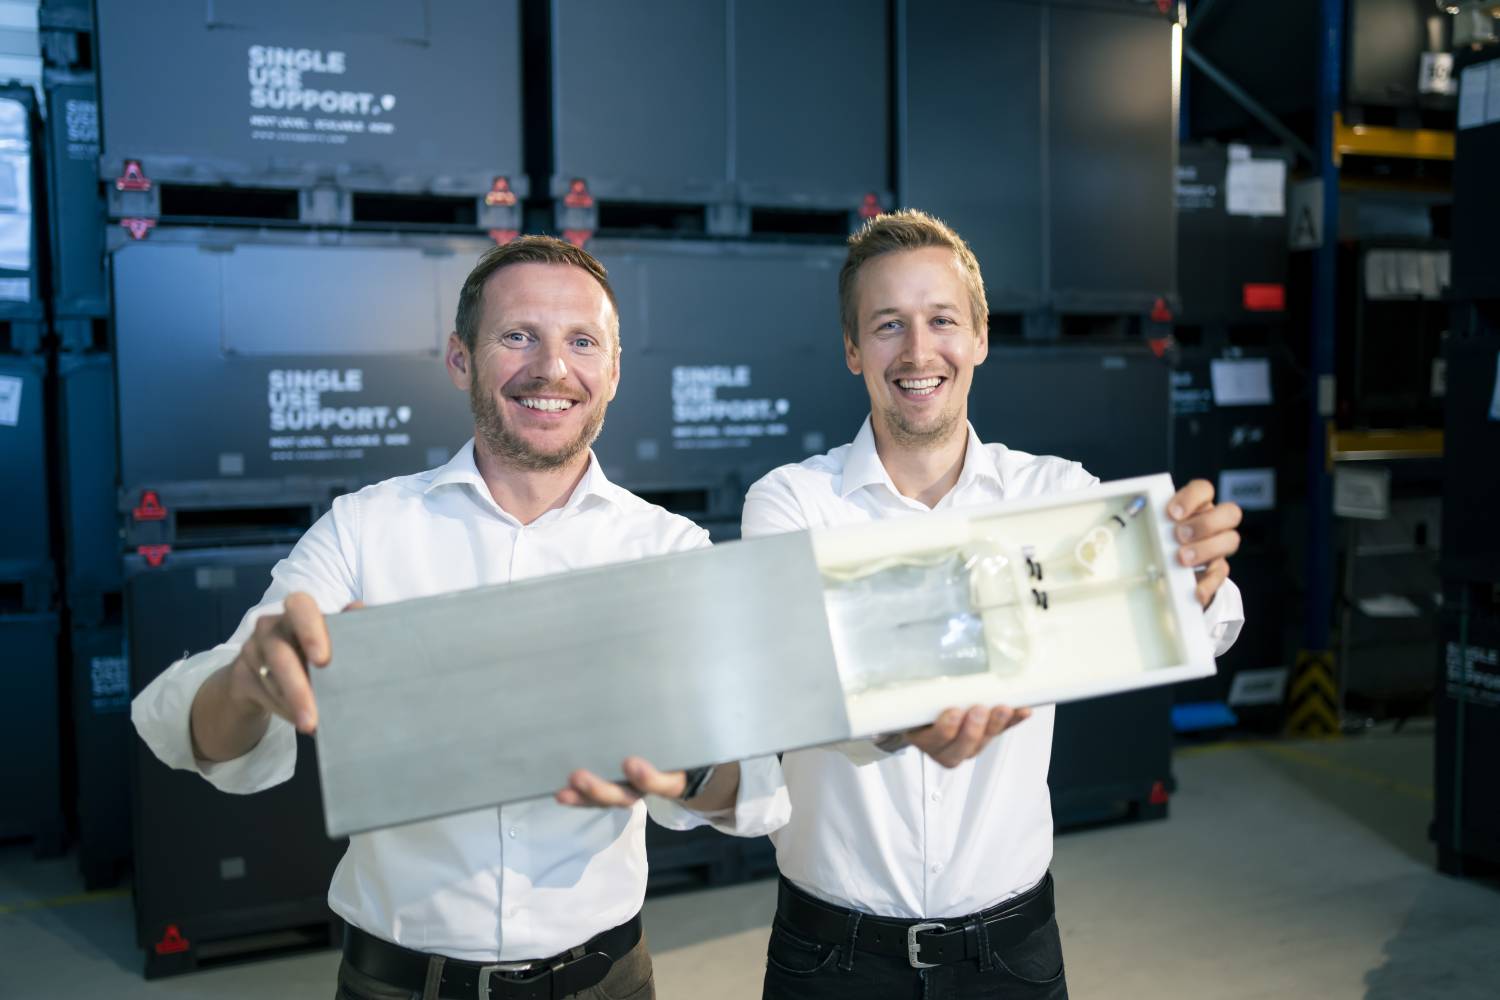 “Entrepreneurs Of The Year” Thomas Wurm and Johannes Kirchmair ©Single Use Support